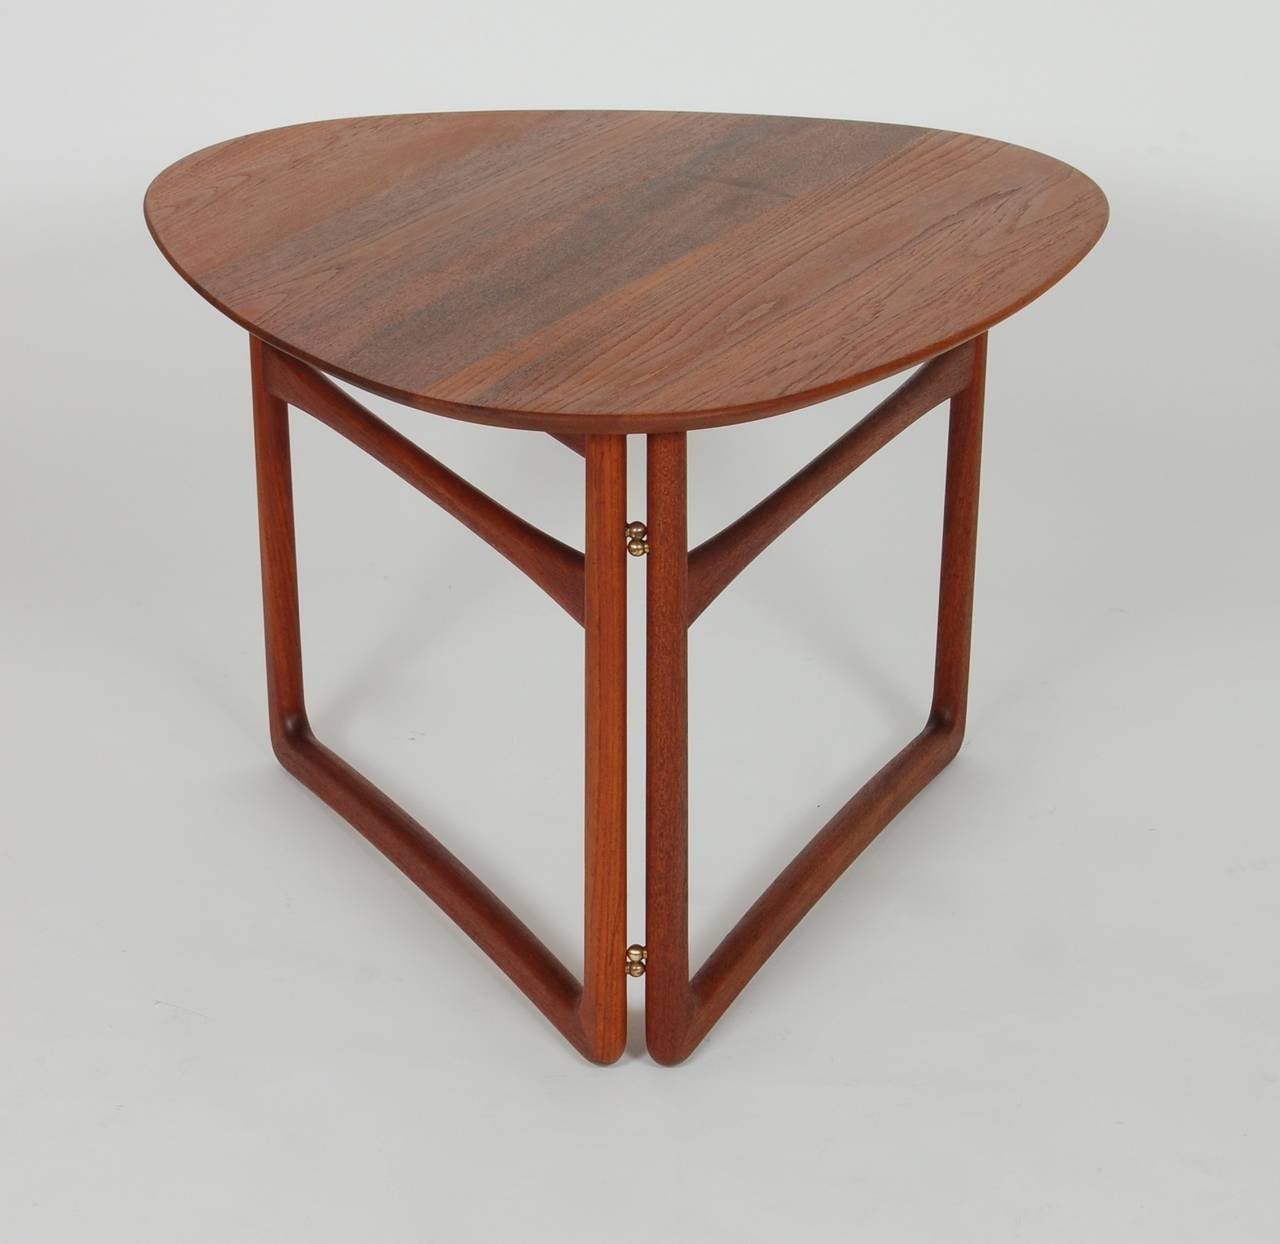 Teak folding side table designed by Peter Hvidt and Orla Molgaard-Nielsen for France and Davenkosen in 1956. Solid teak soft triangle form top that can fold down along with the legs for compact storage. The brass hinges add to the minimal design in